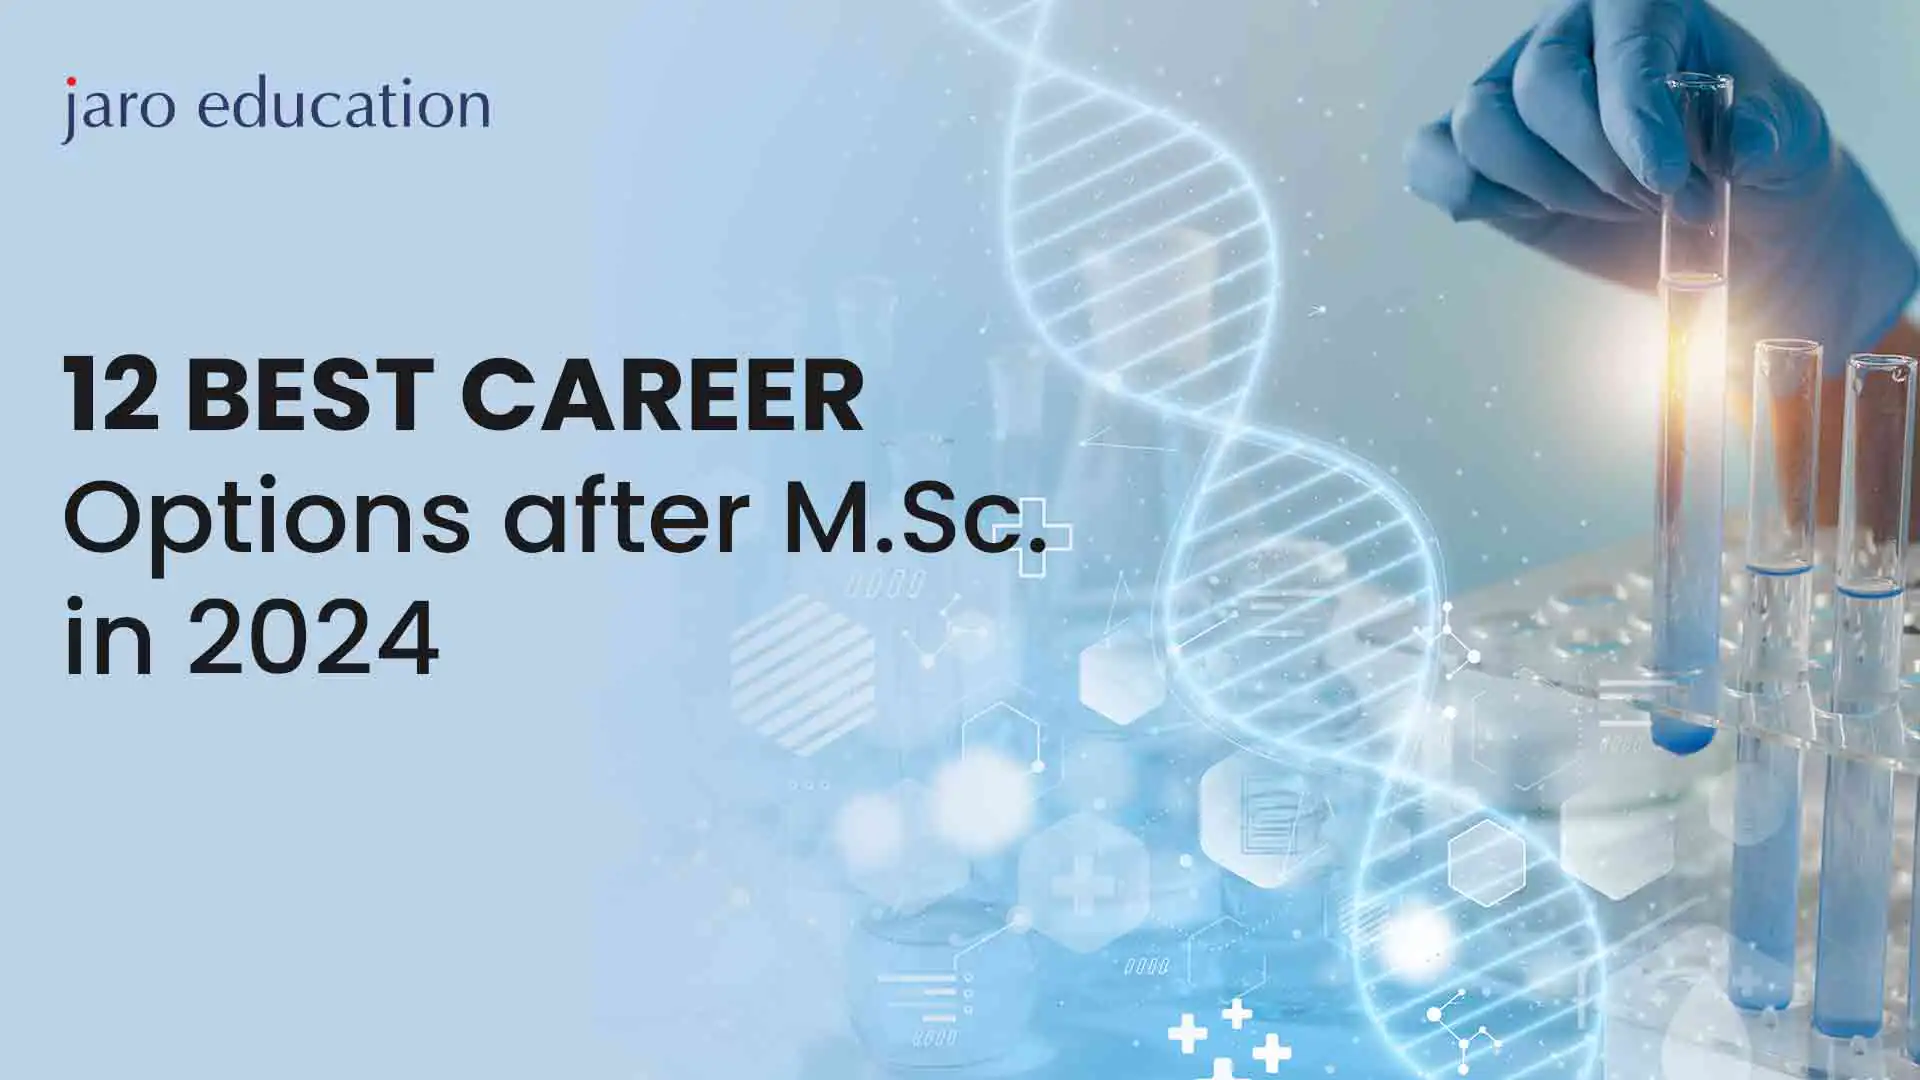 12-Best-Career-Options-after-M.Sc.-in-2024